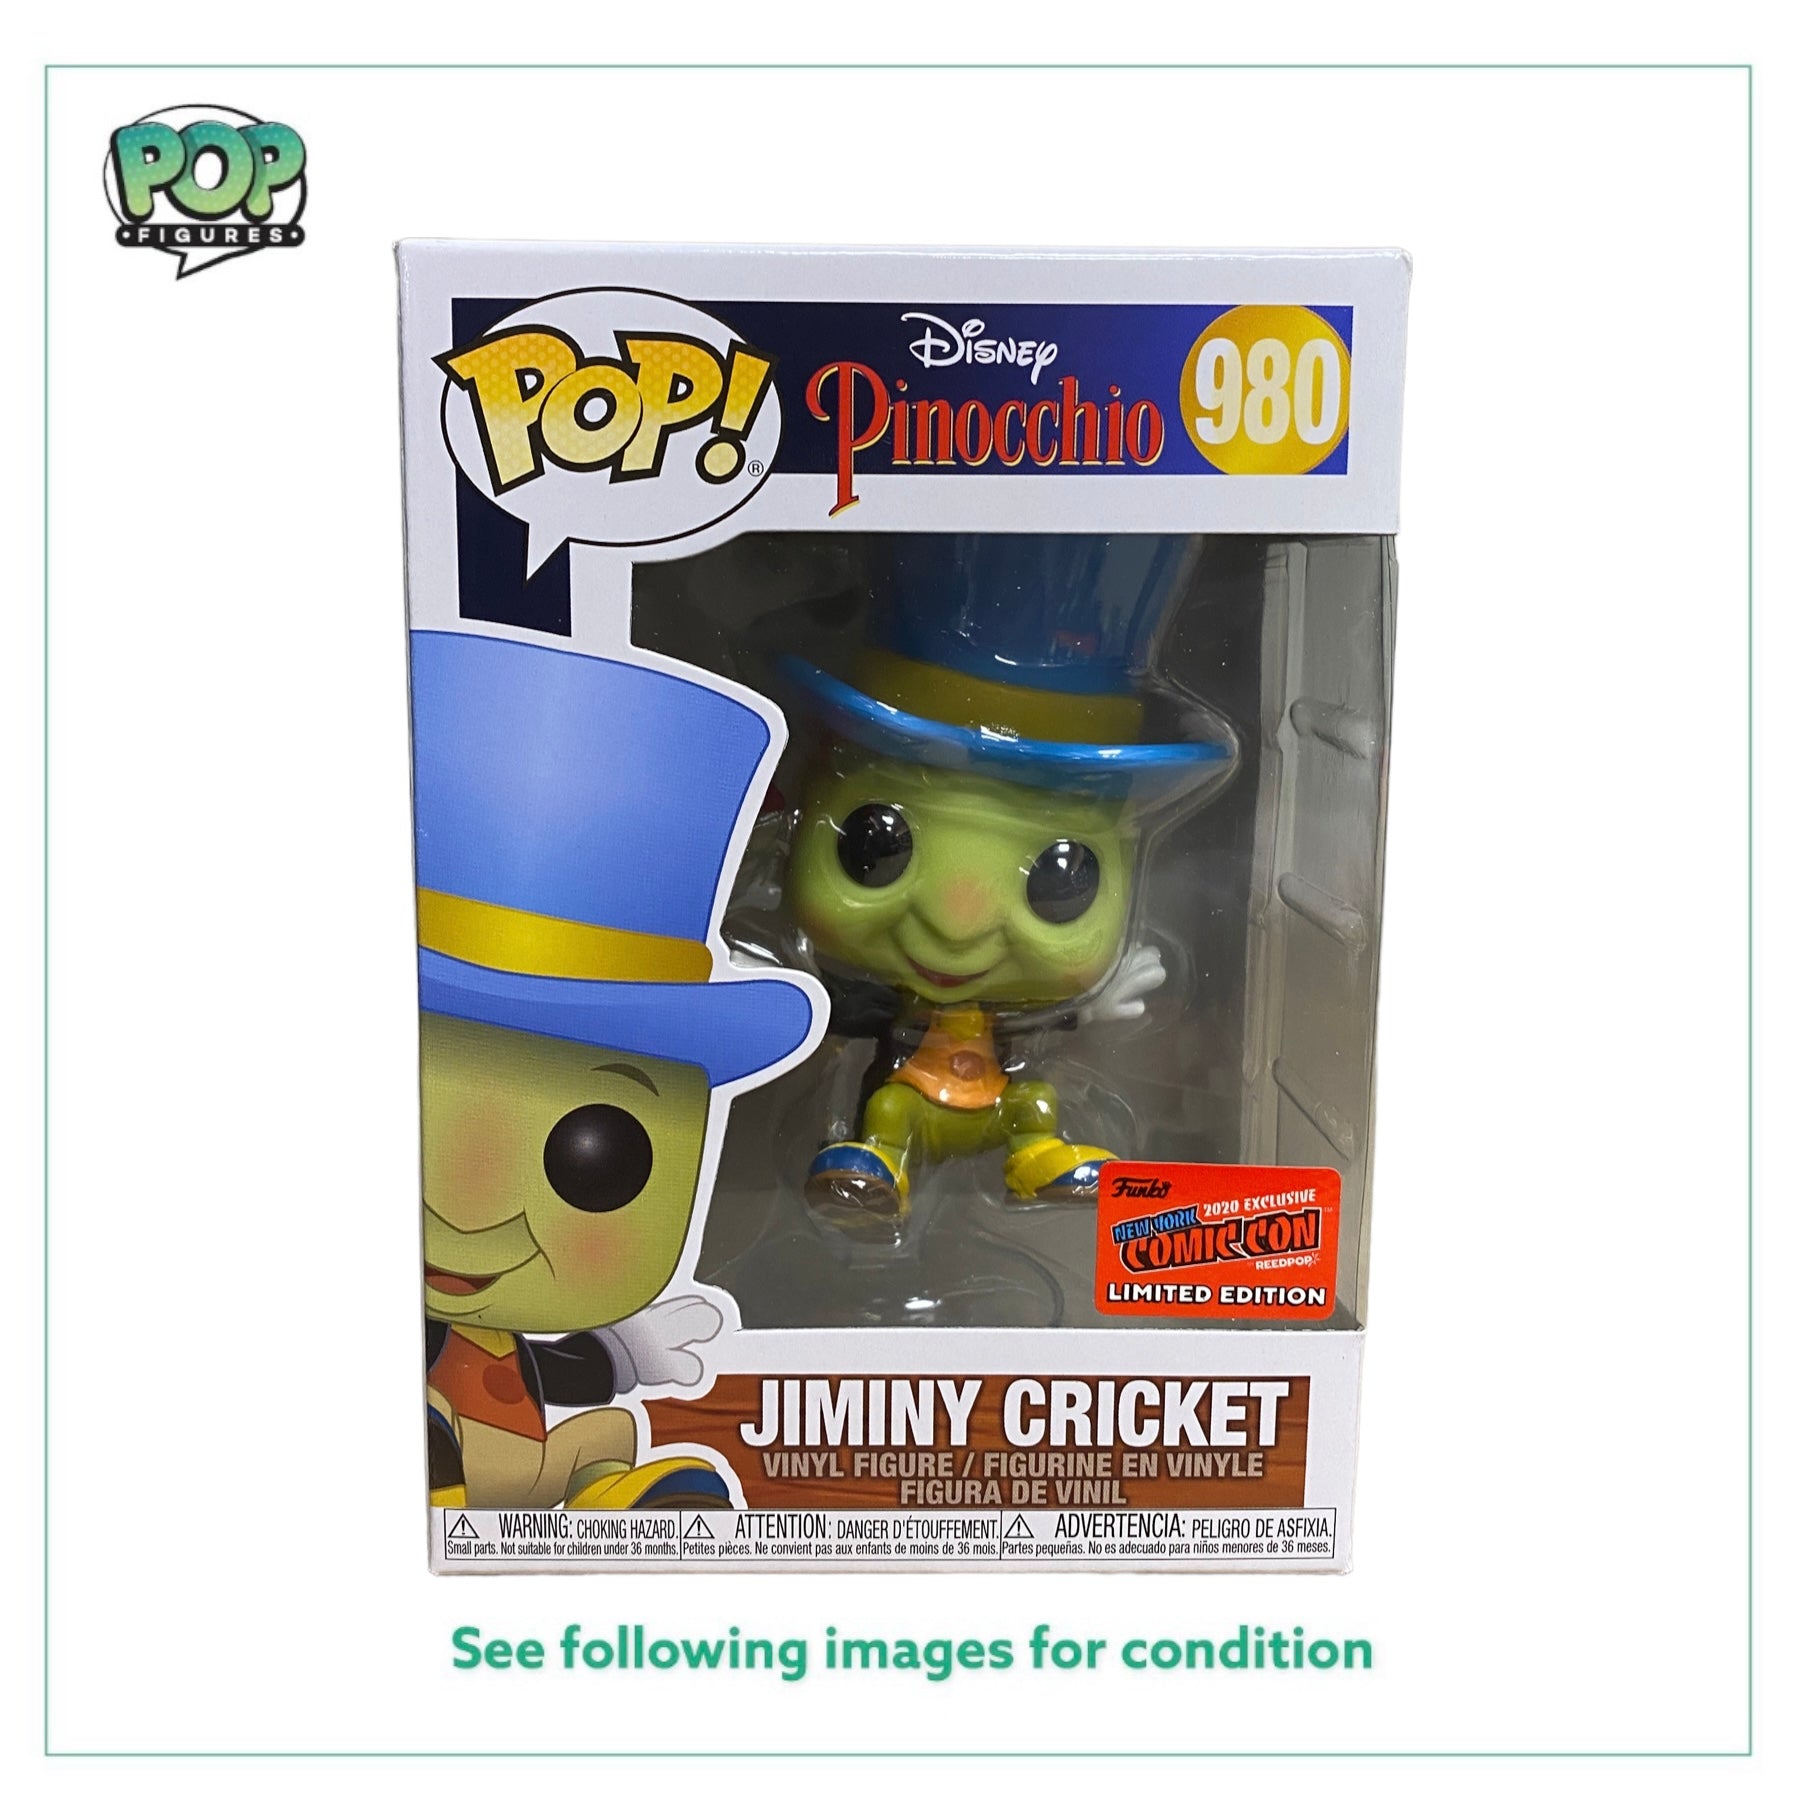 Jiminy Cricket #980 (Floating) Funko Pop! - Pinocchio - NYCC 2020 Official Convention Exclusive - Condition 9/10